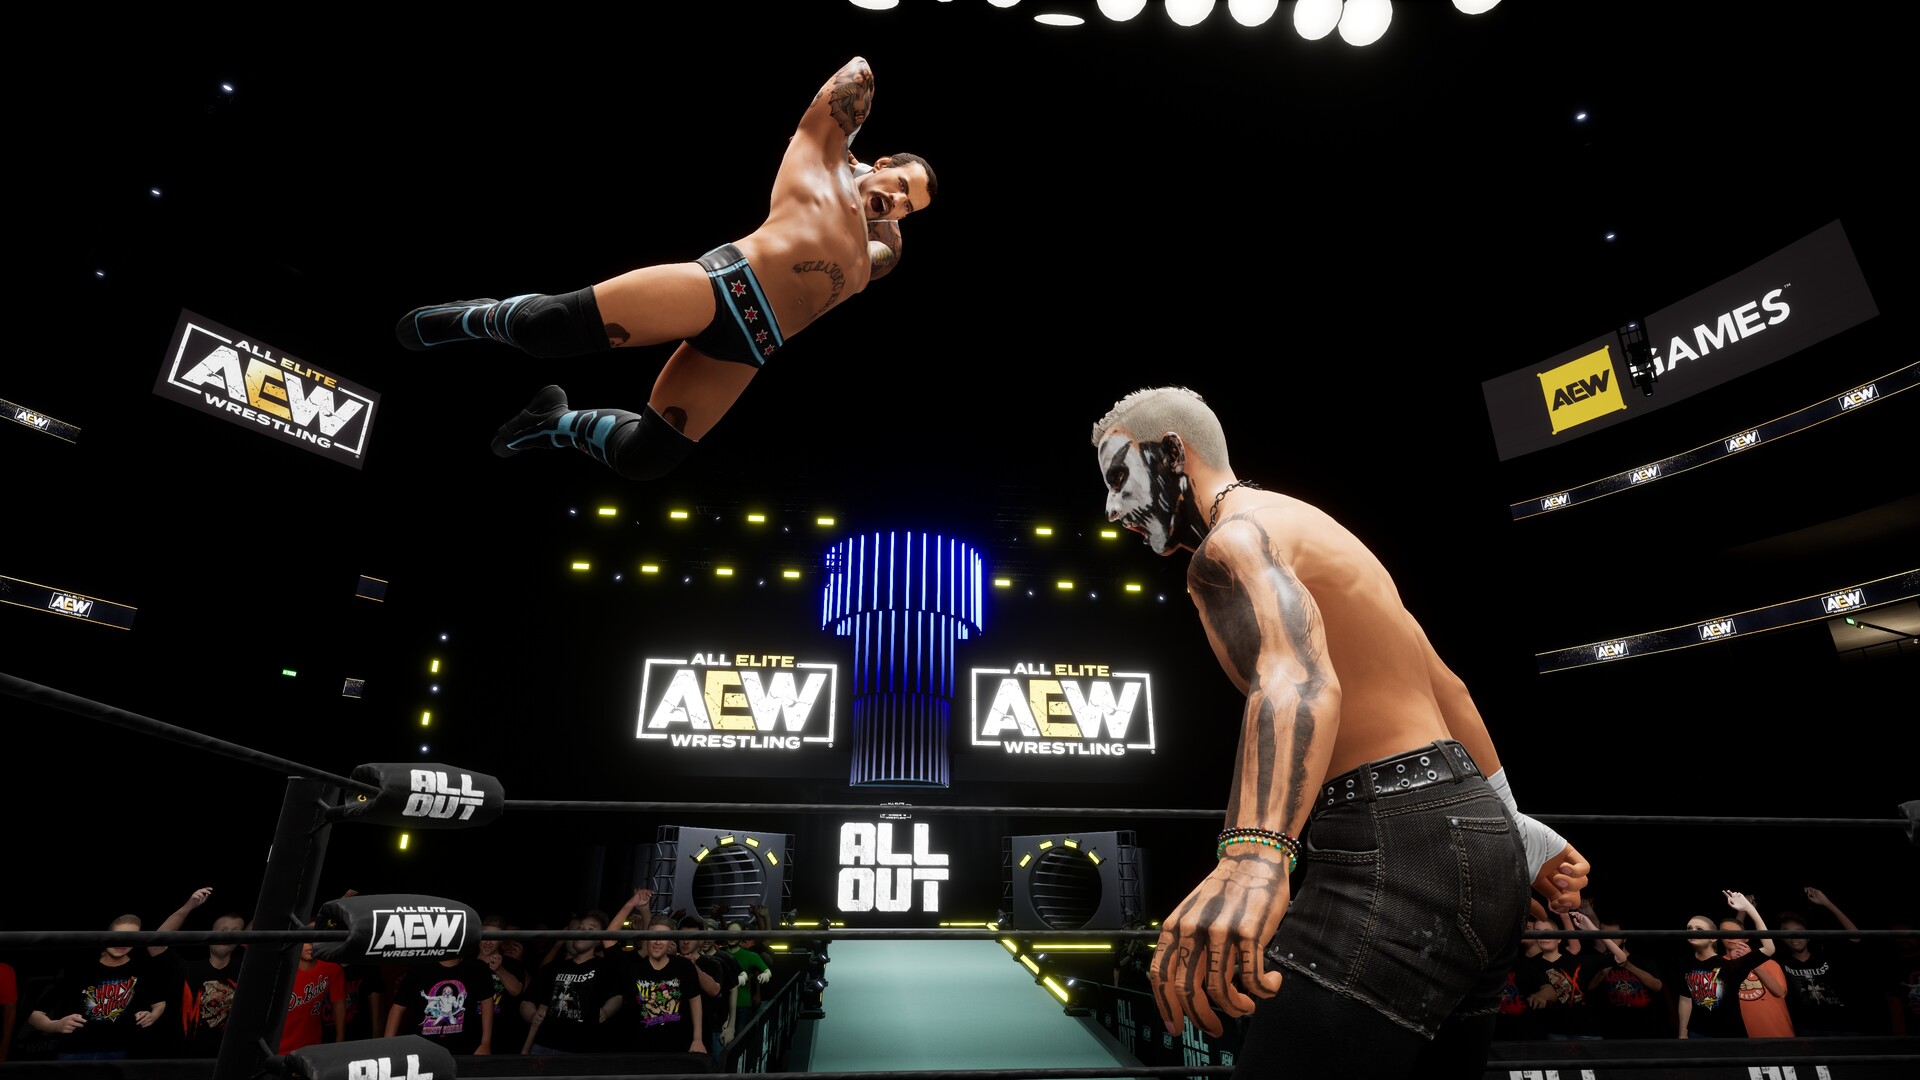 AEW: Fight Forever on Steam